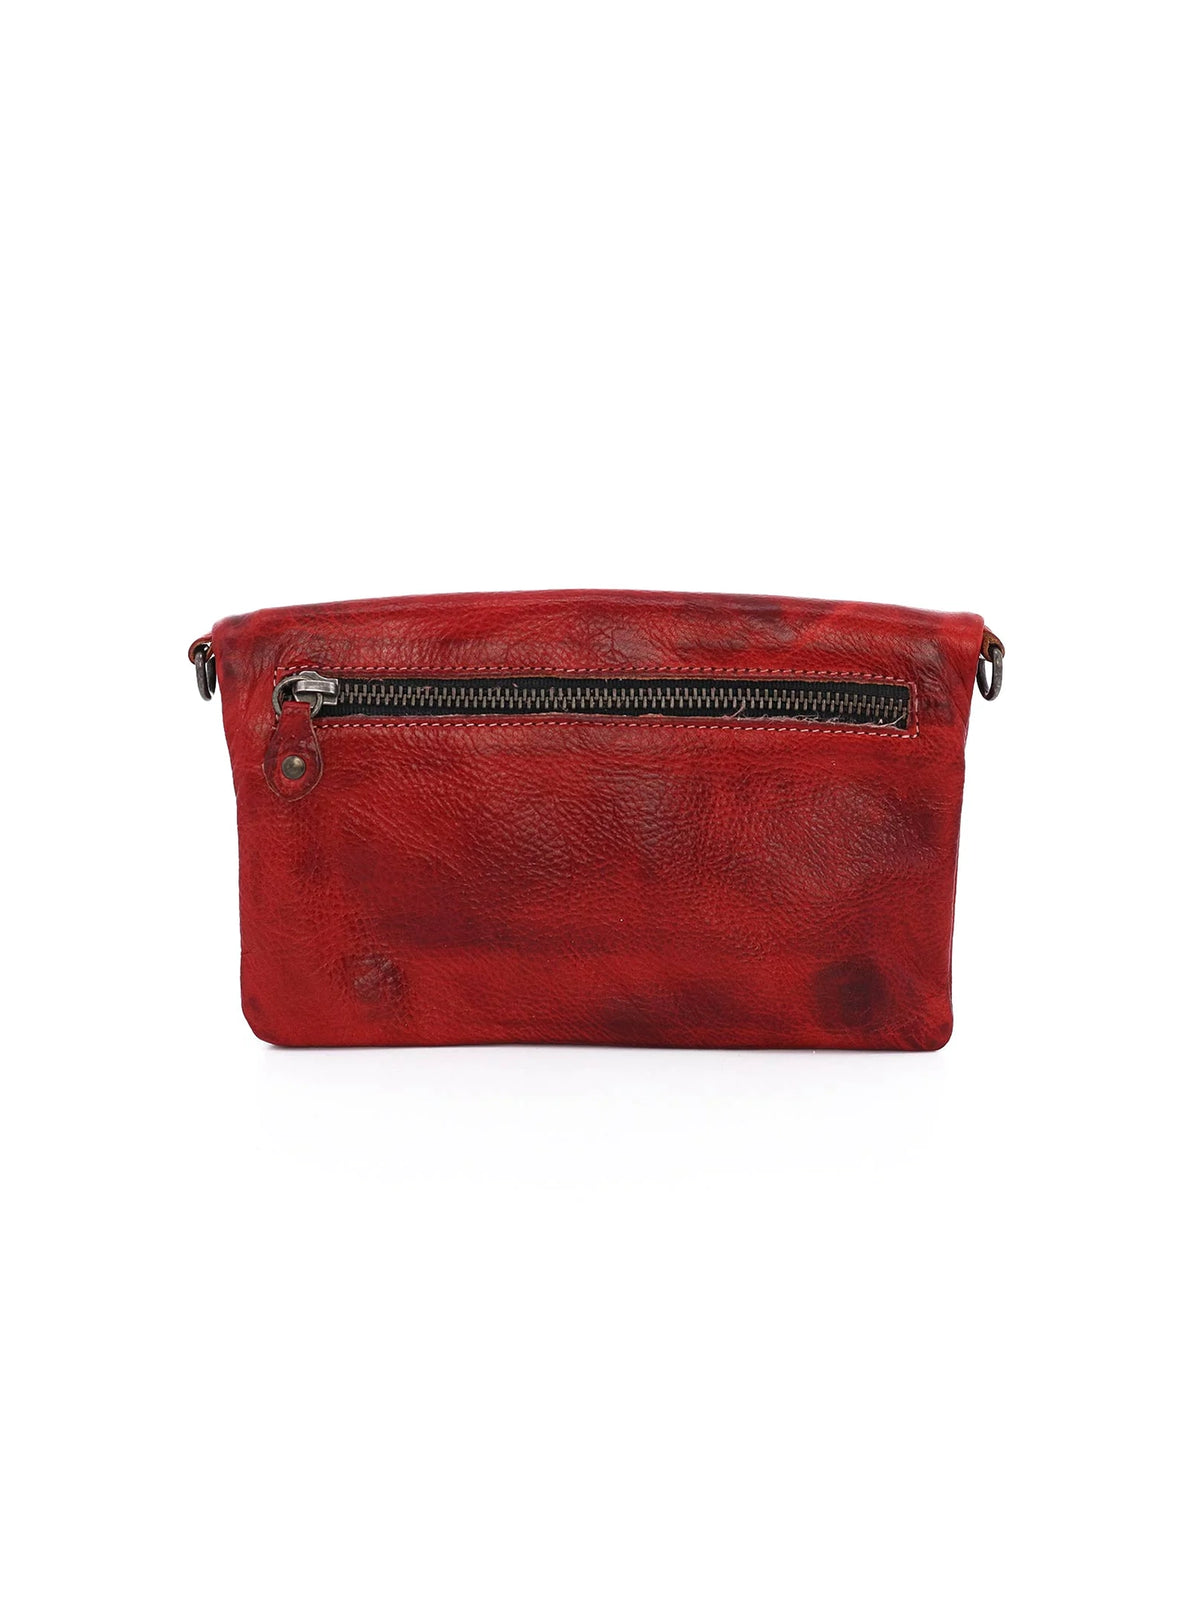 BEDSTU cadence convertible crossbody clutch wallet in red rustic leather